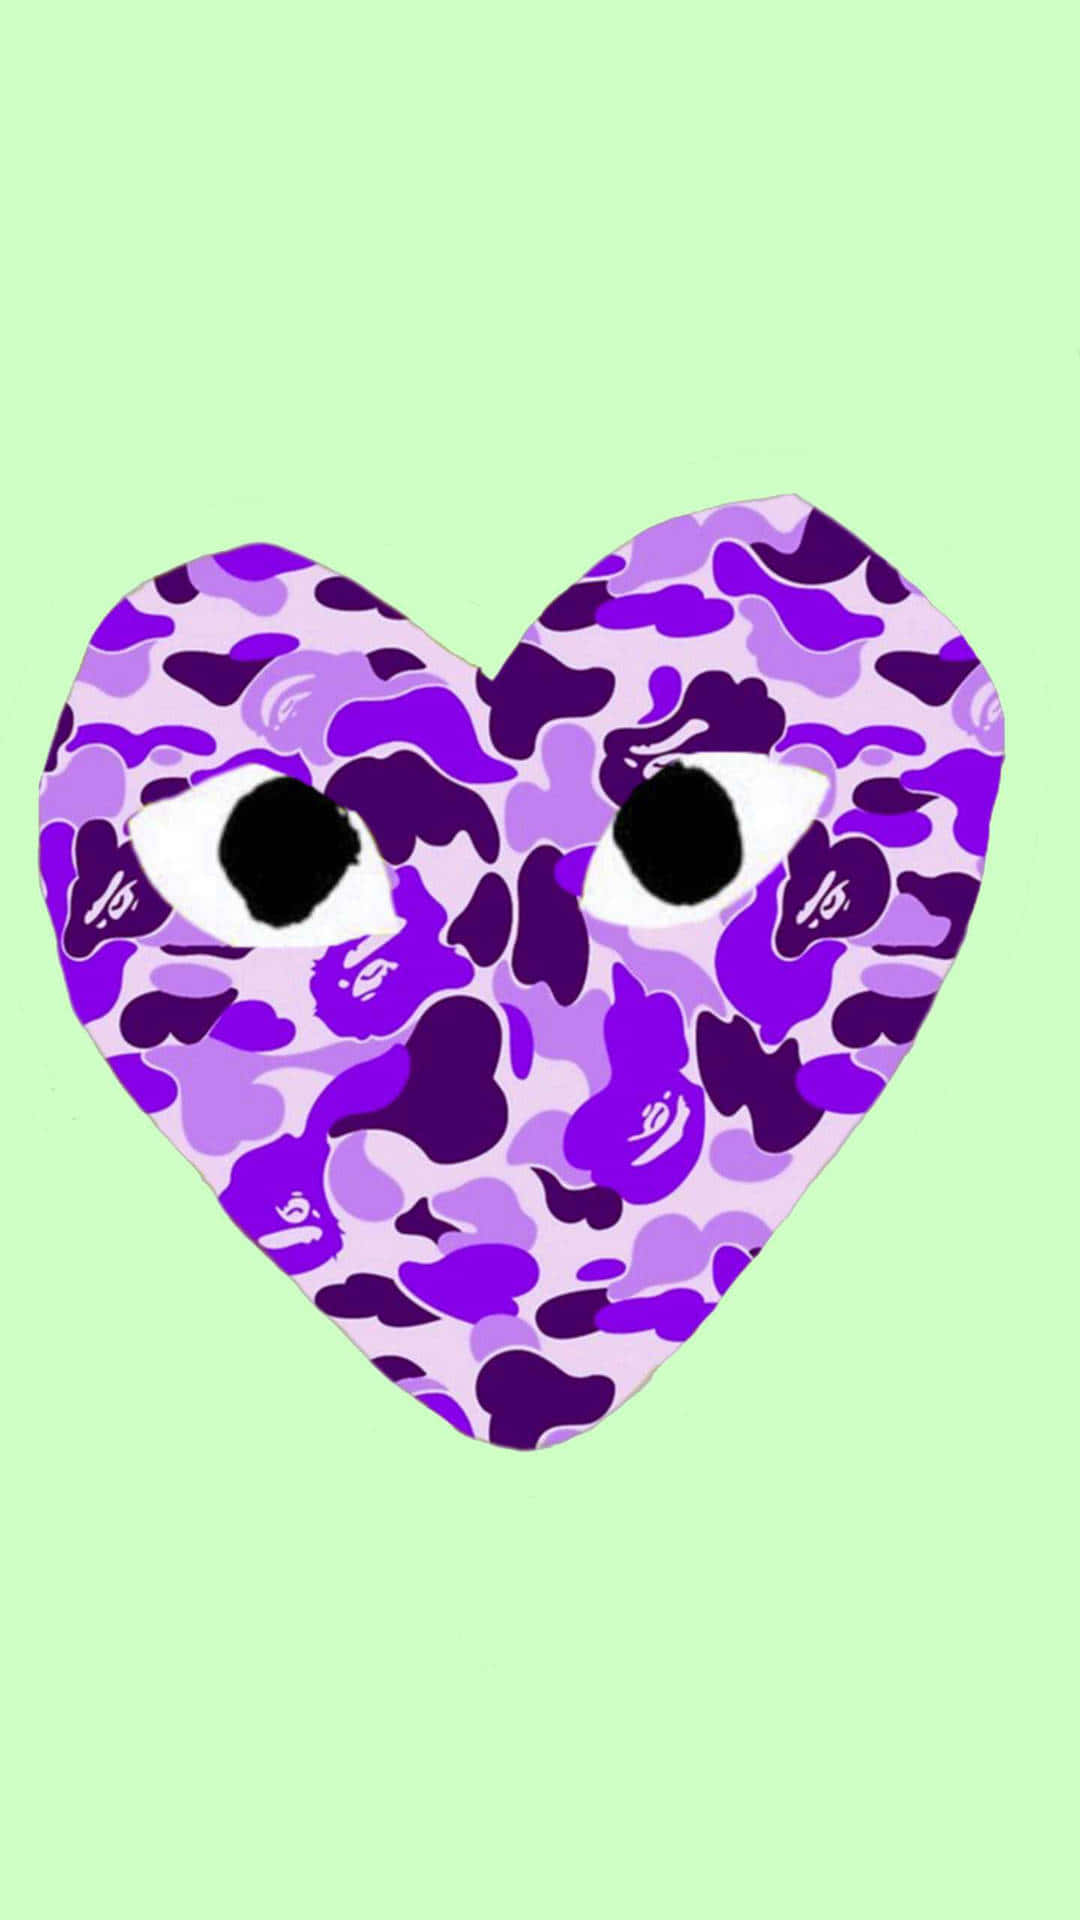 A Purple Camouflage Heart On A Green Background